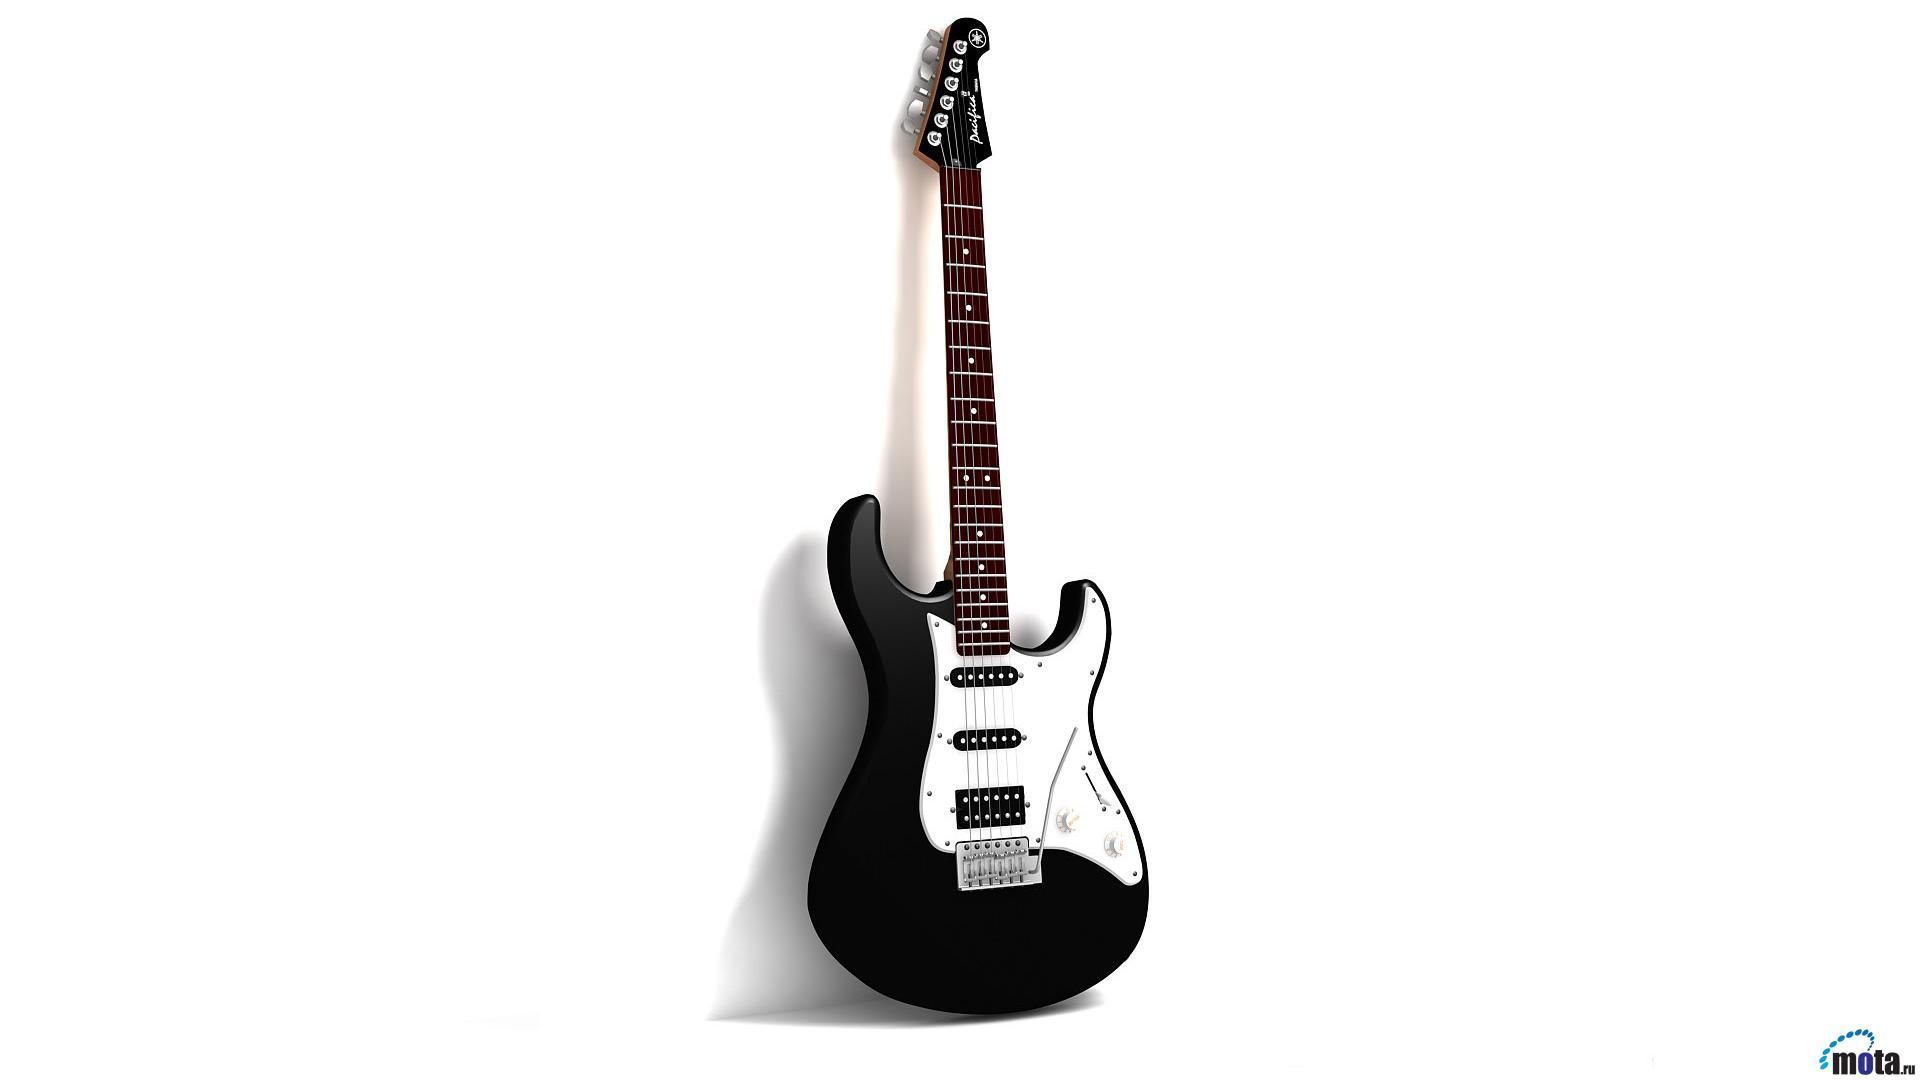 Download Wallpaper Black and white electric guitar 1920 x 1080